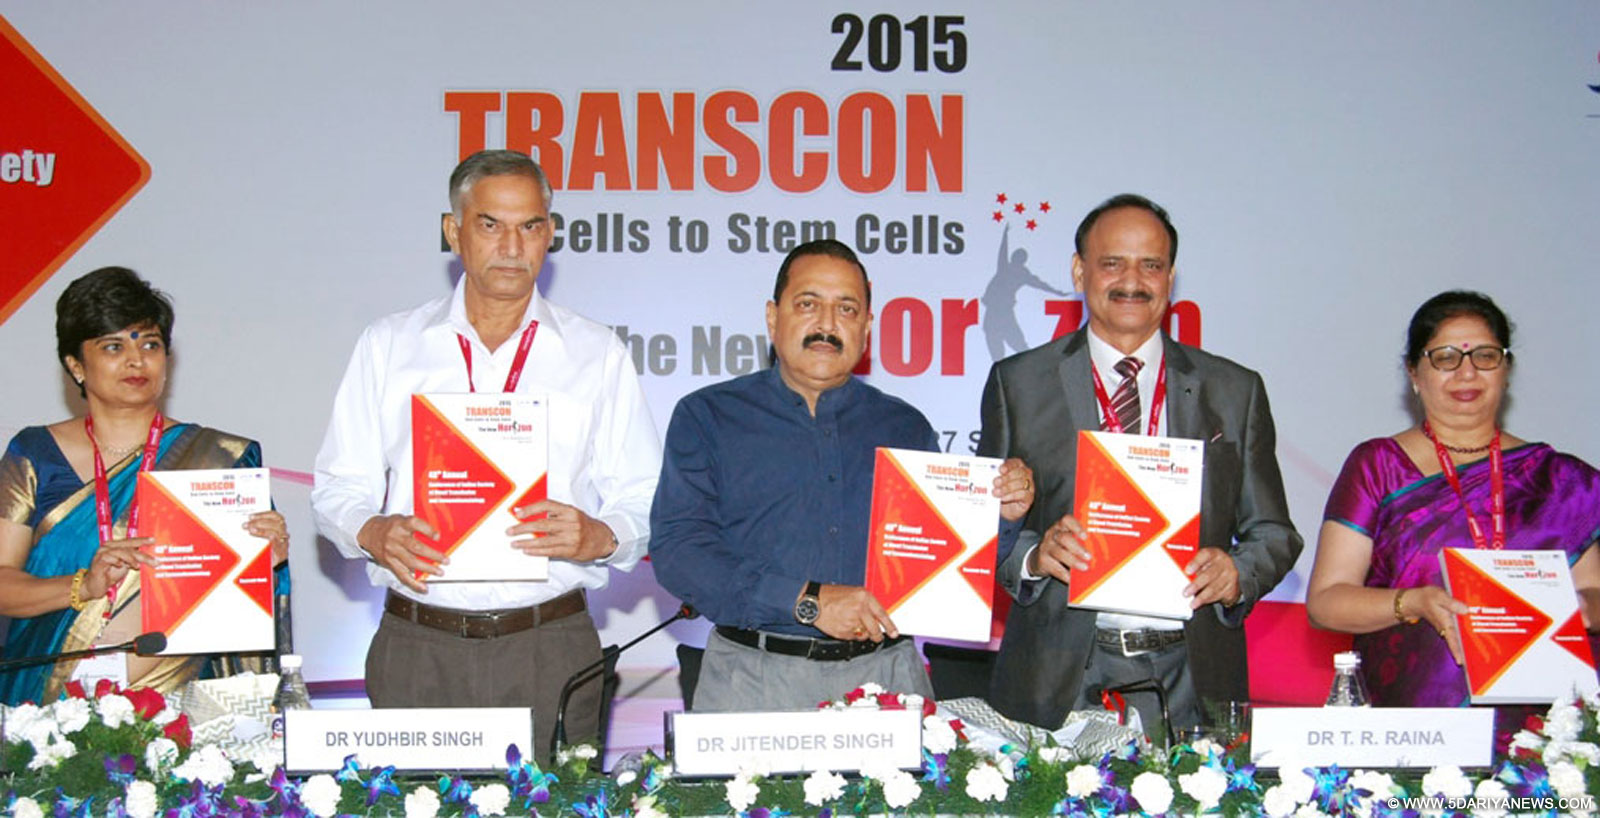 Dr. Jitendra Singh releasing the souvenir at the 40th Annual National Conference of "Indian Society of Blood Transfusion and Immunohematology", in New Delhi on September 25, 2015.